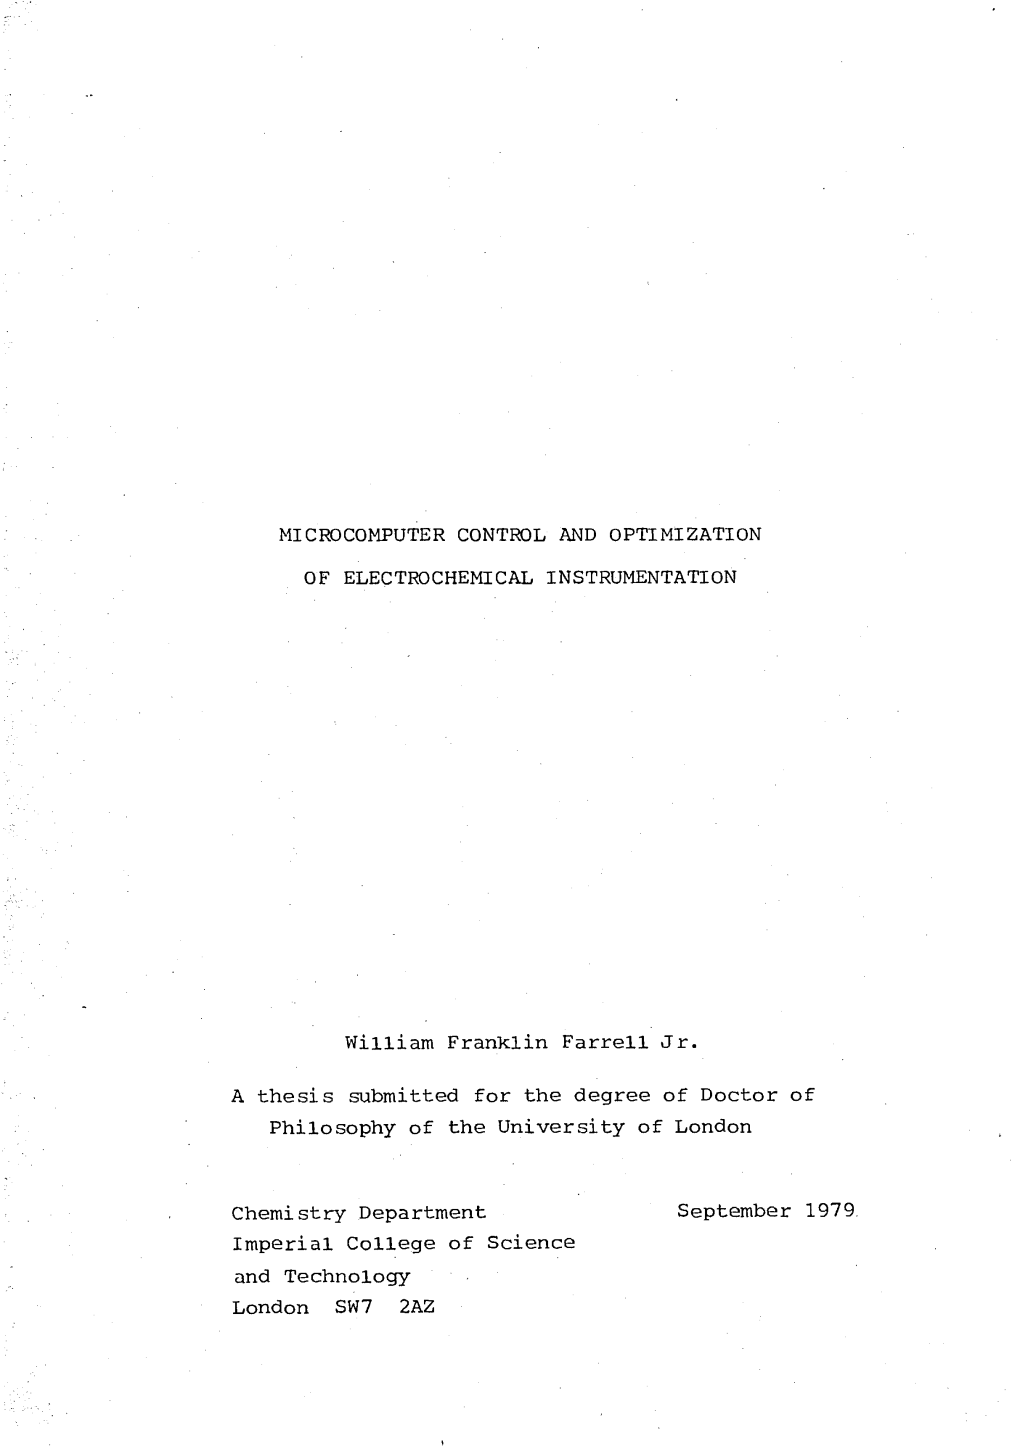 MICROCOMPUTER CONTROL and OPTIMIZATION of ELECTROCHEMICAL INSTRUMENTATION William Franklin Farrell Jr. a Thesis Submitted for Th